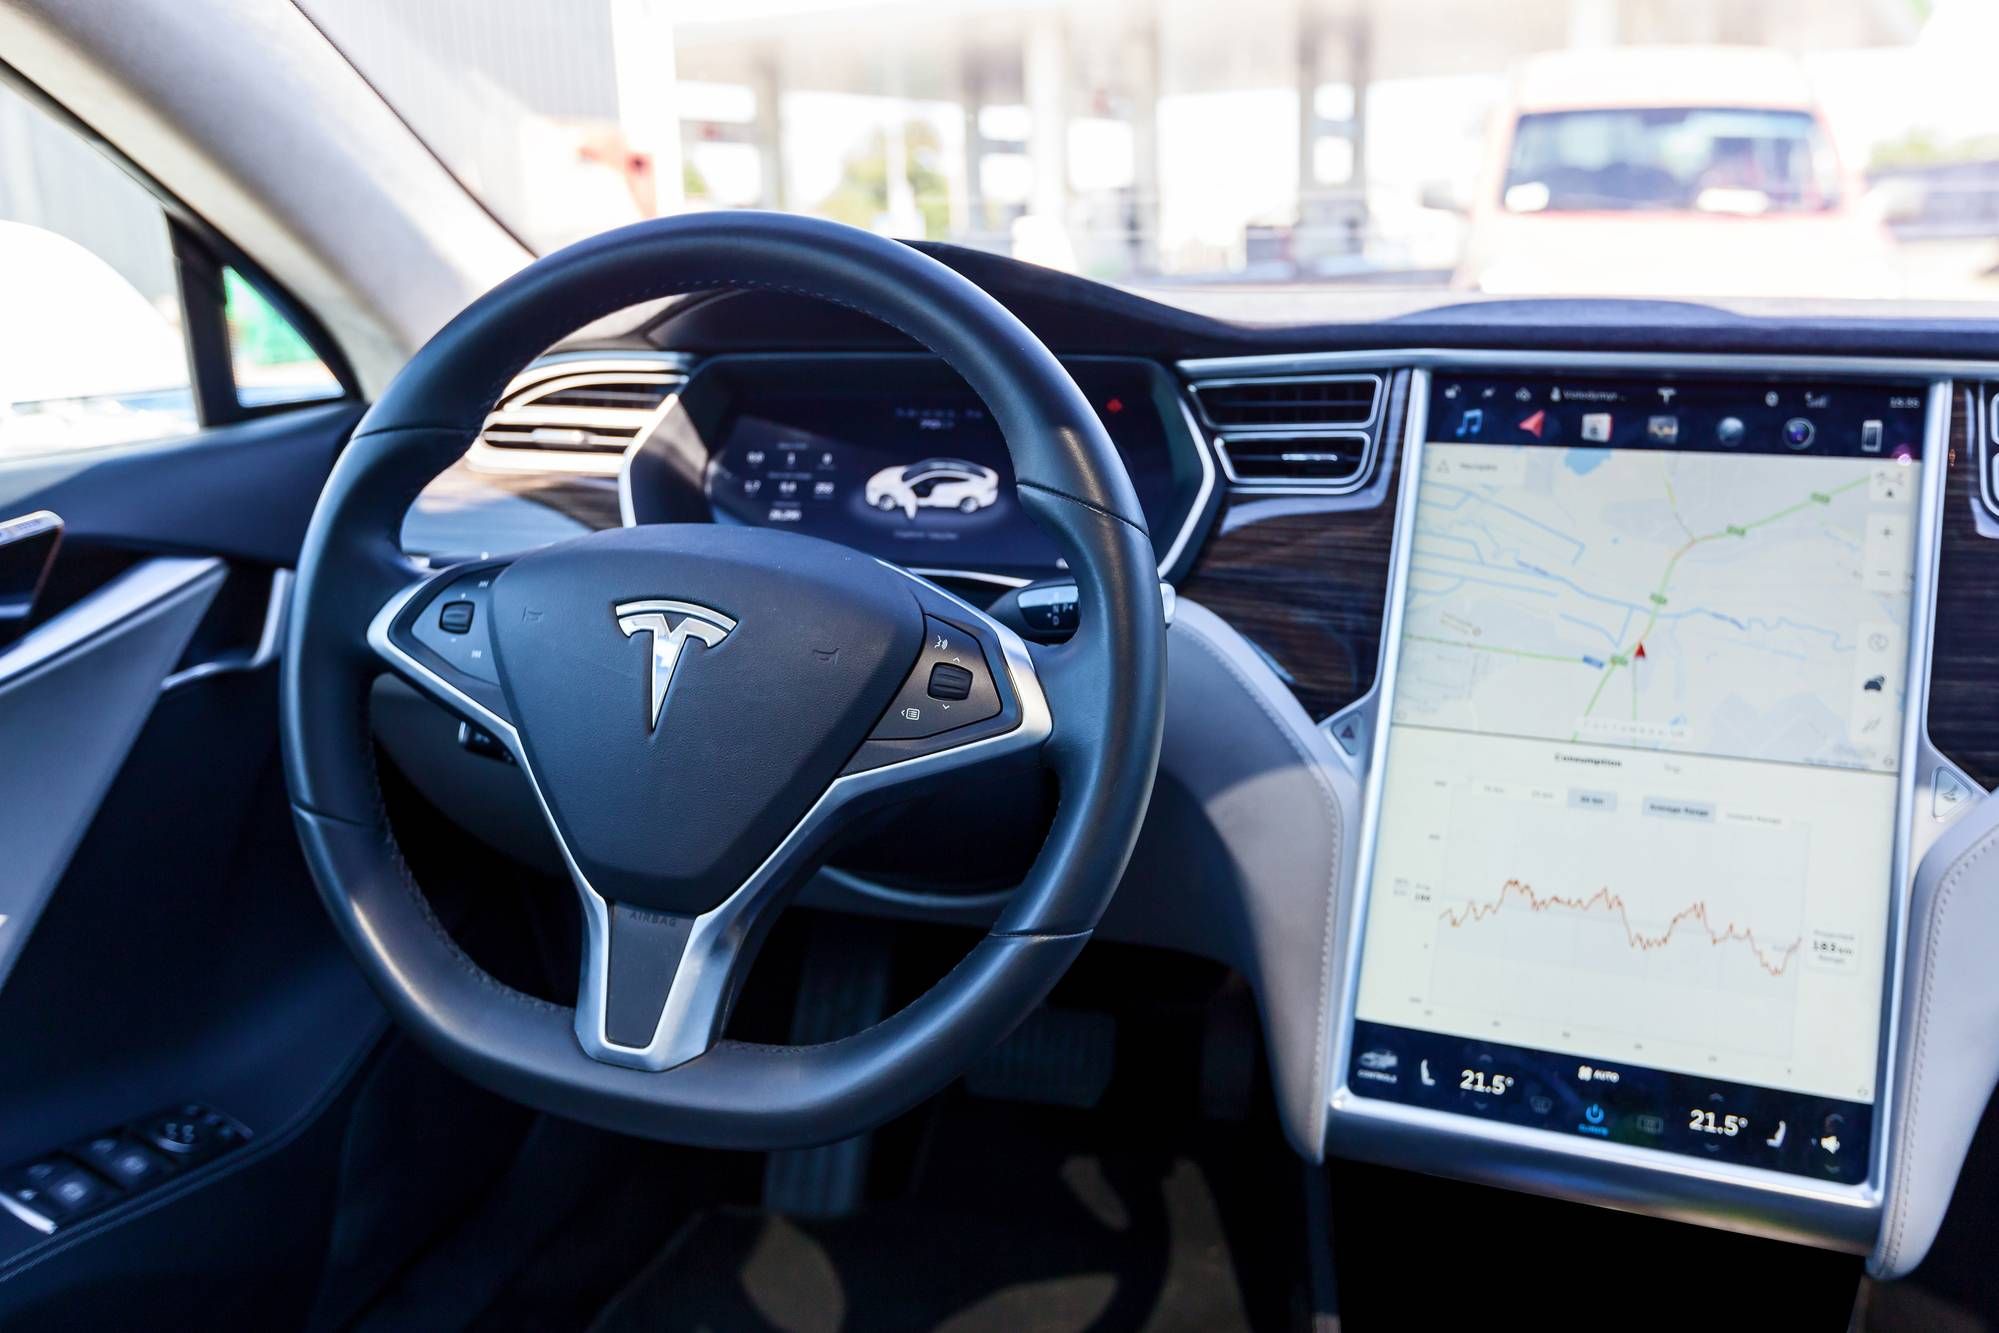 A recall has been ordered for defective Tesla touch screens 